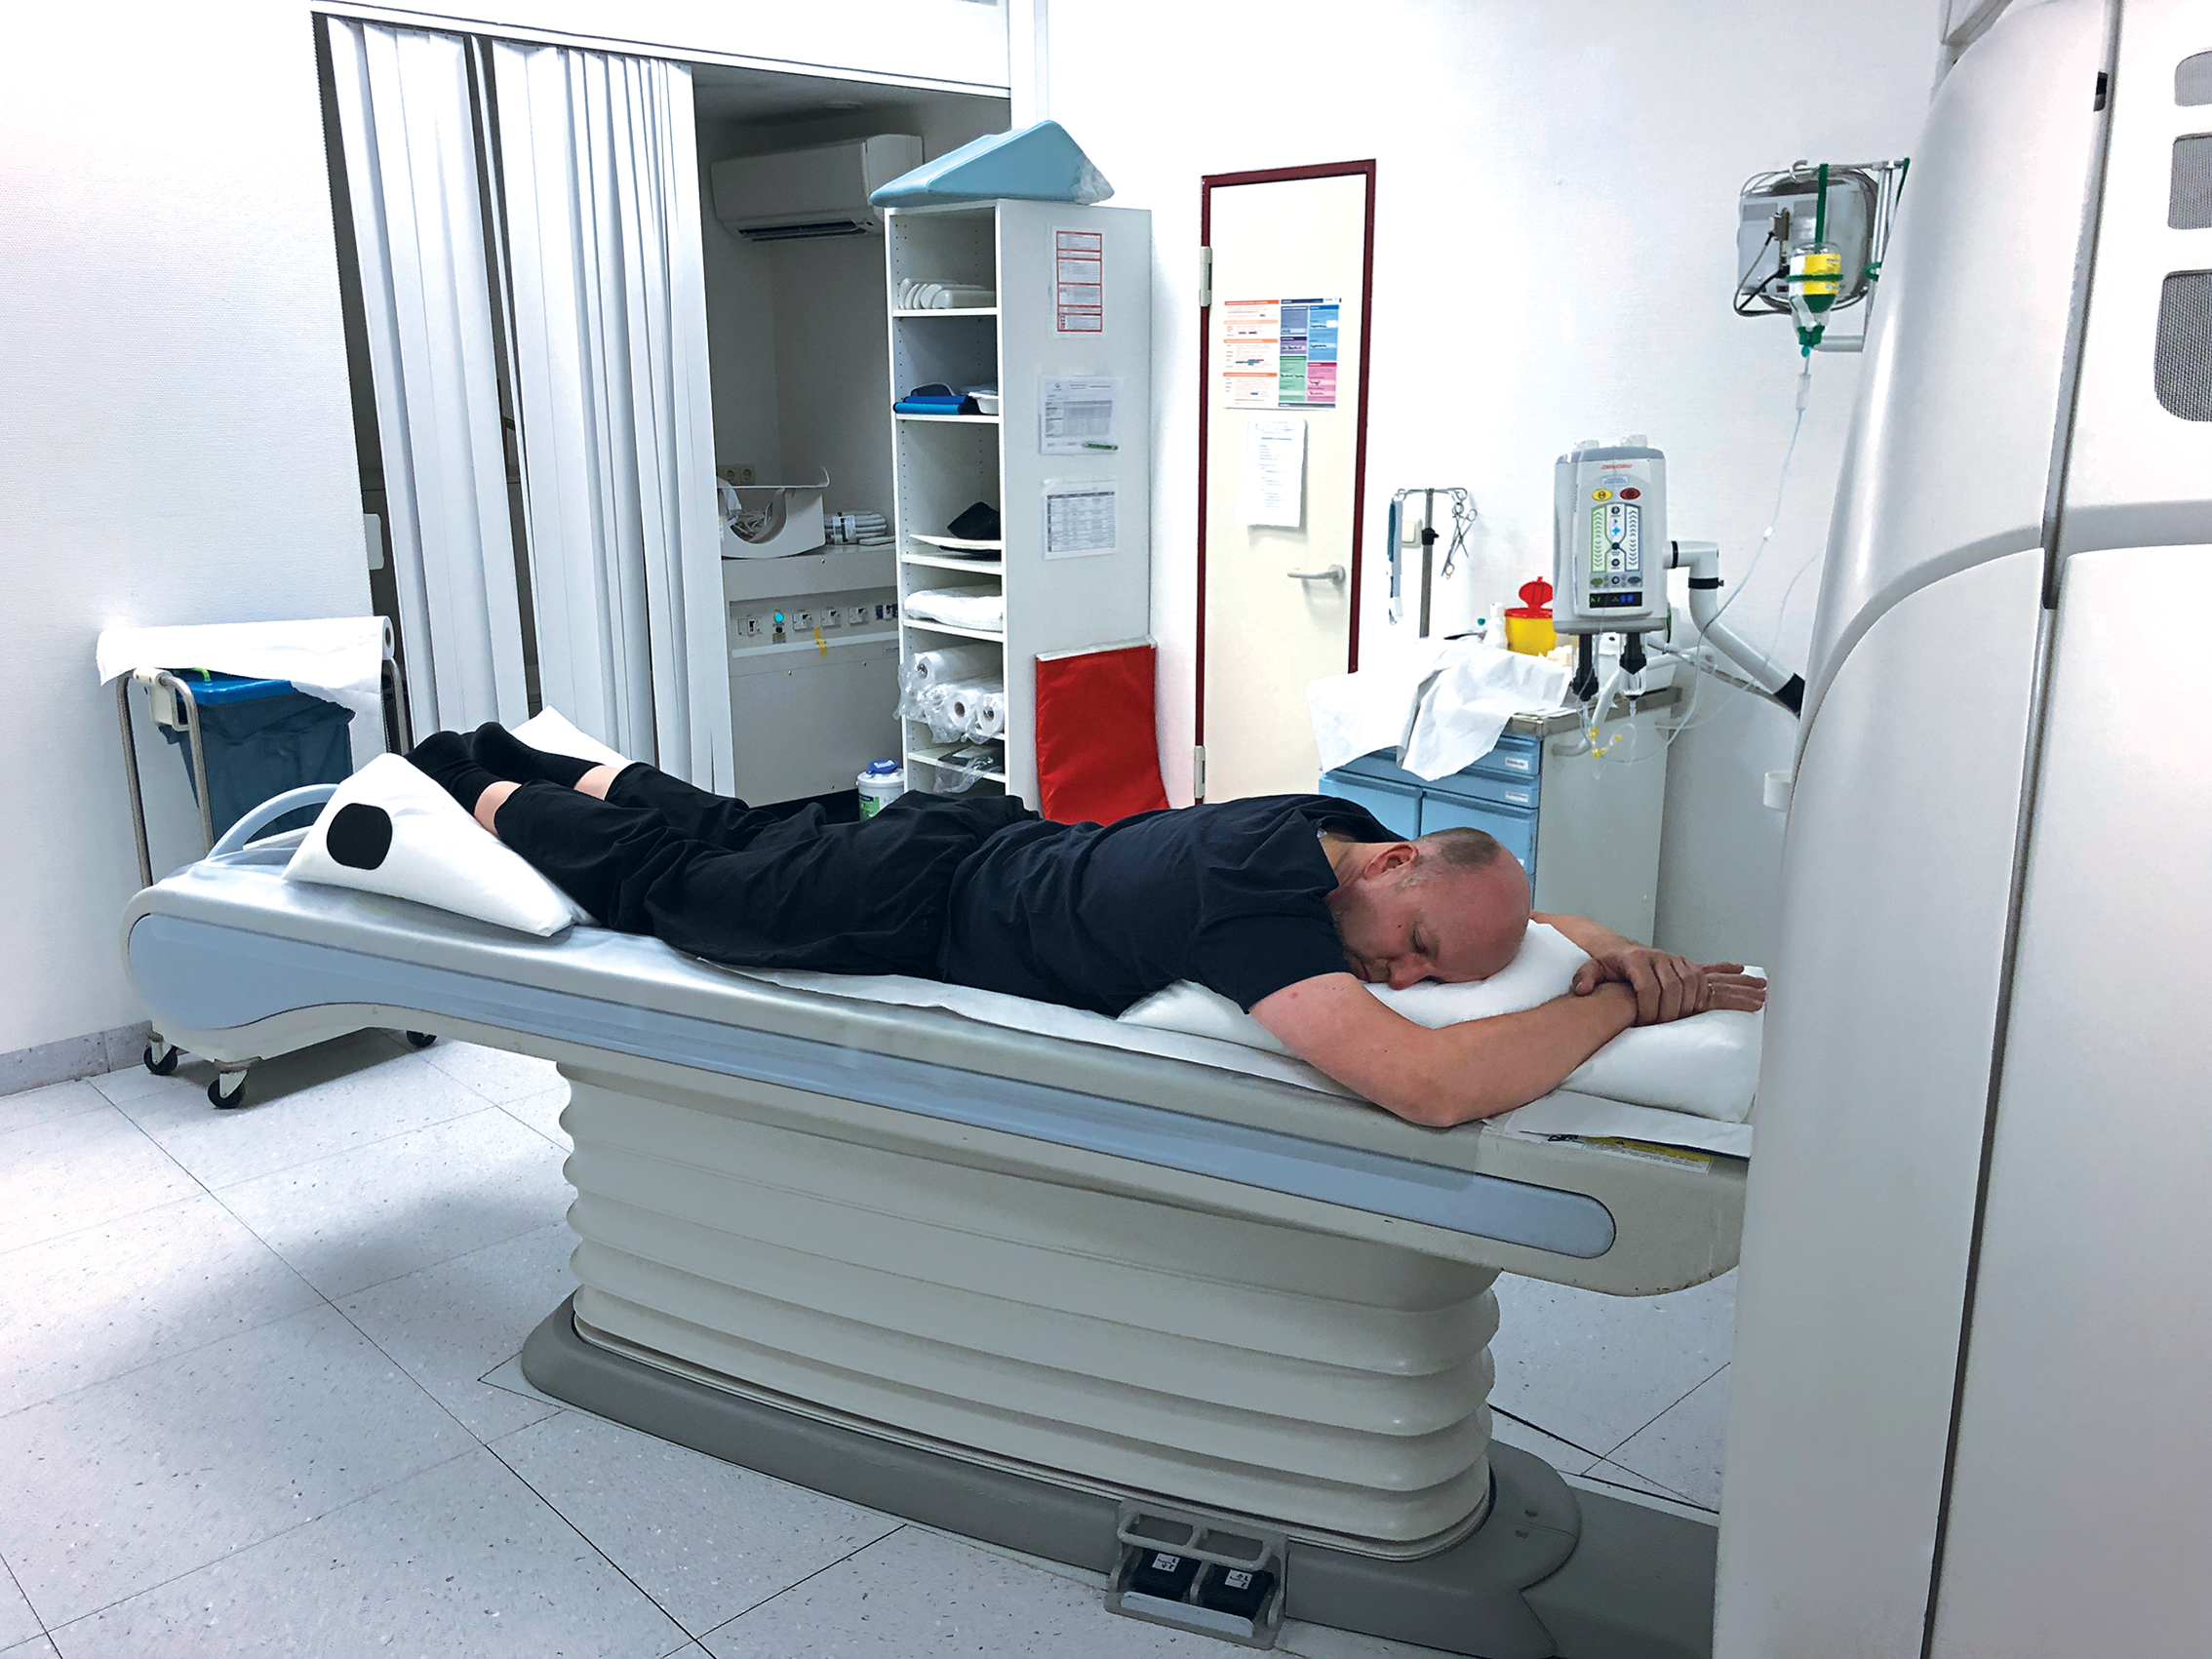 Patient in prone position on CT using various PearlFit products